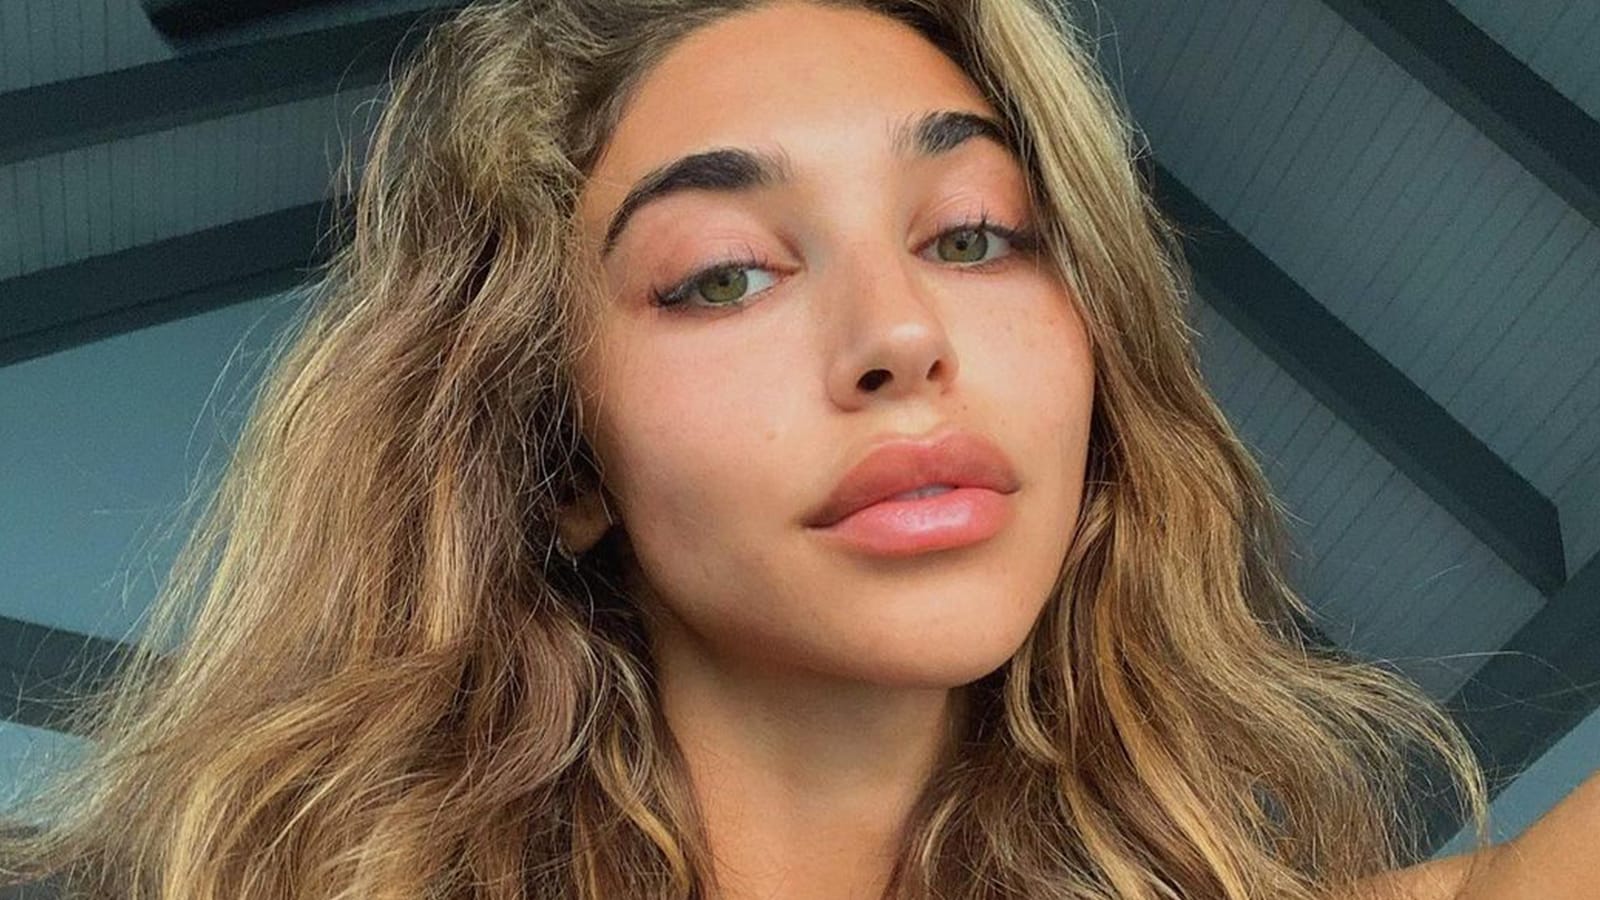 Chantel Jeffries Plastic Surgery Before and After Her Boob Job